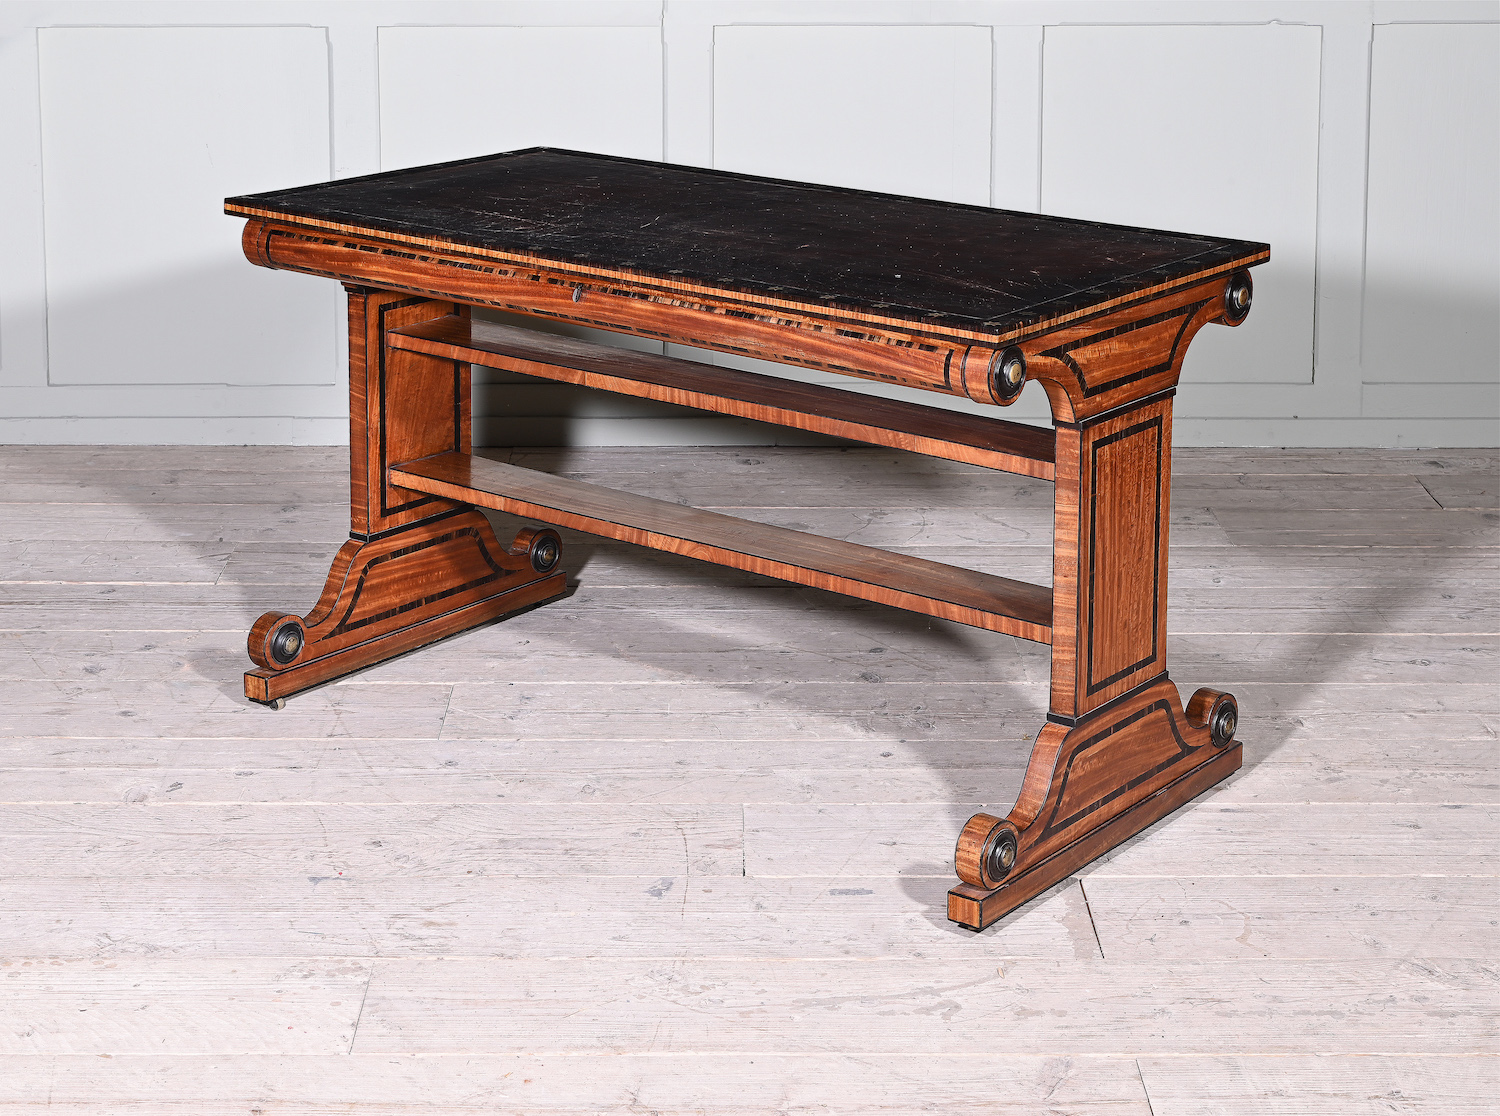 A fine regency satinwood, Macassar and ebony library table by George Oakley (1773-1840)